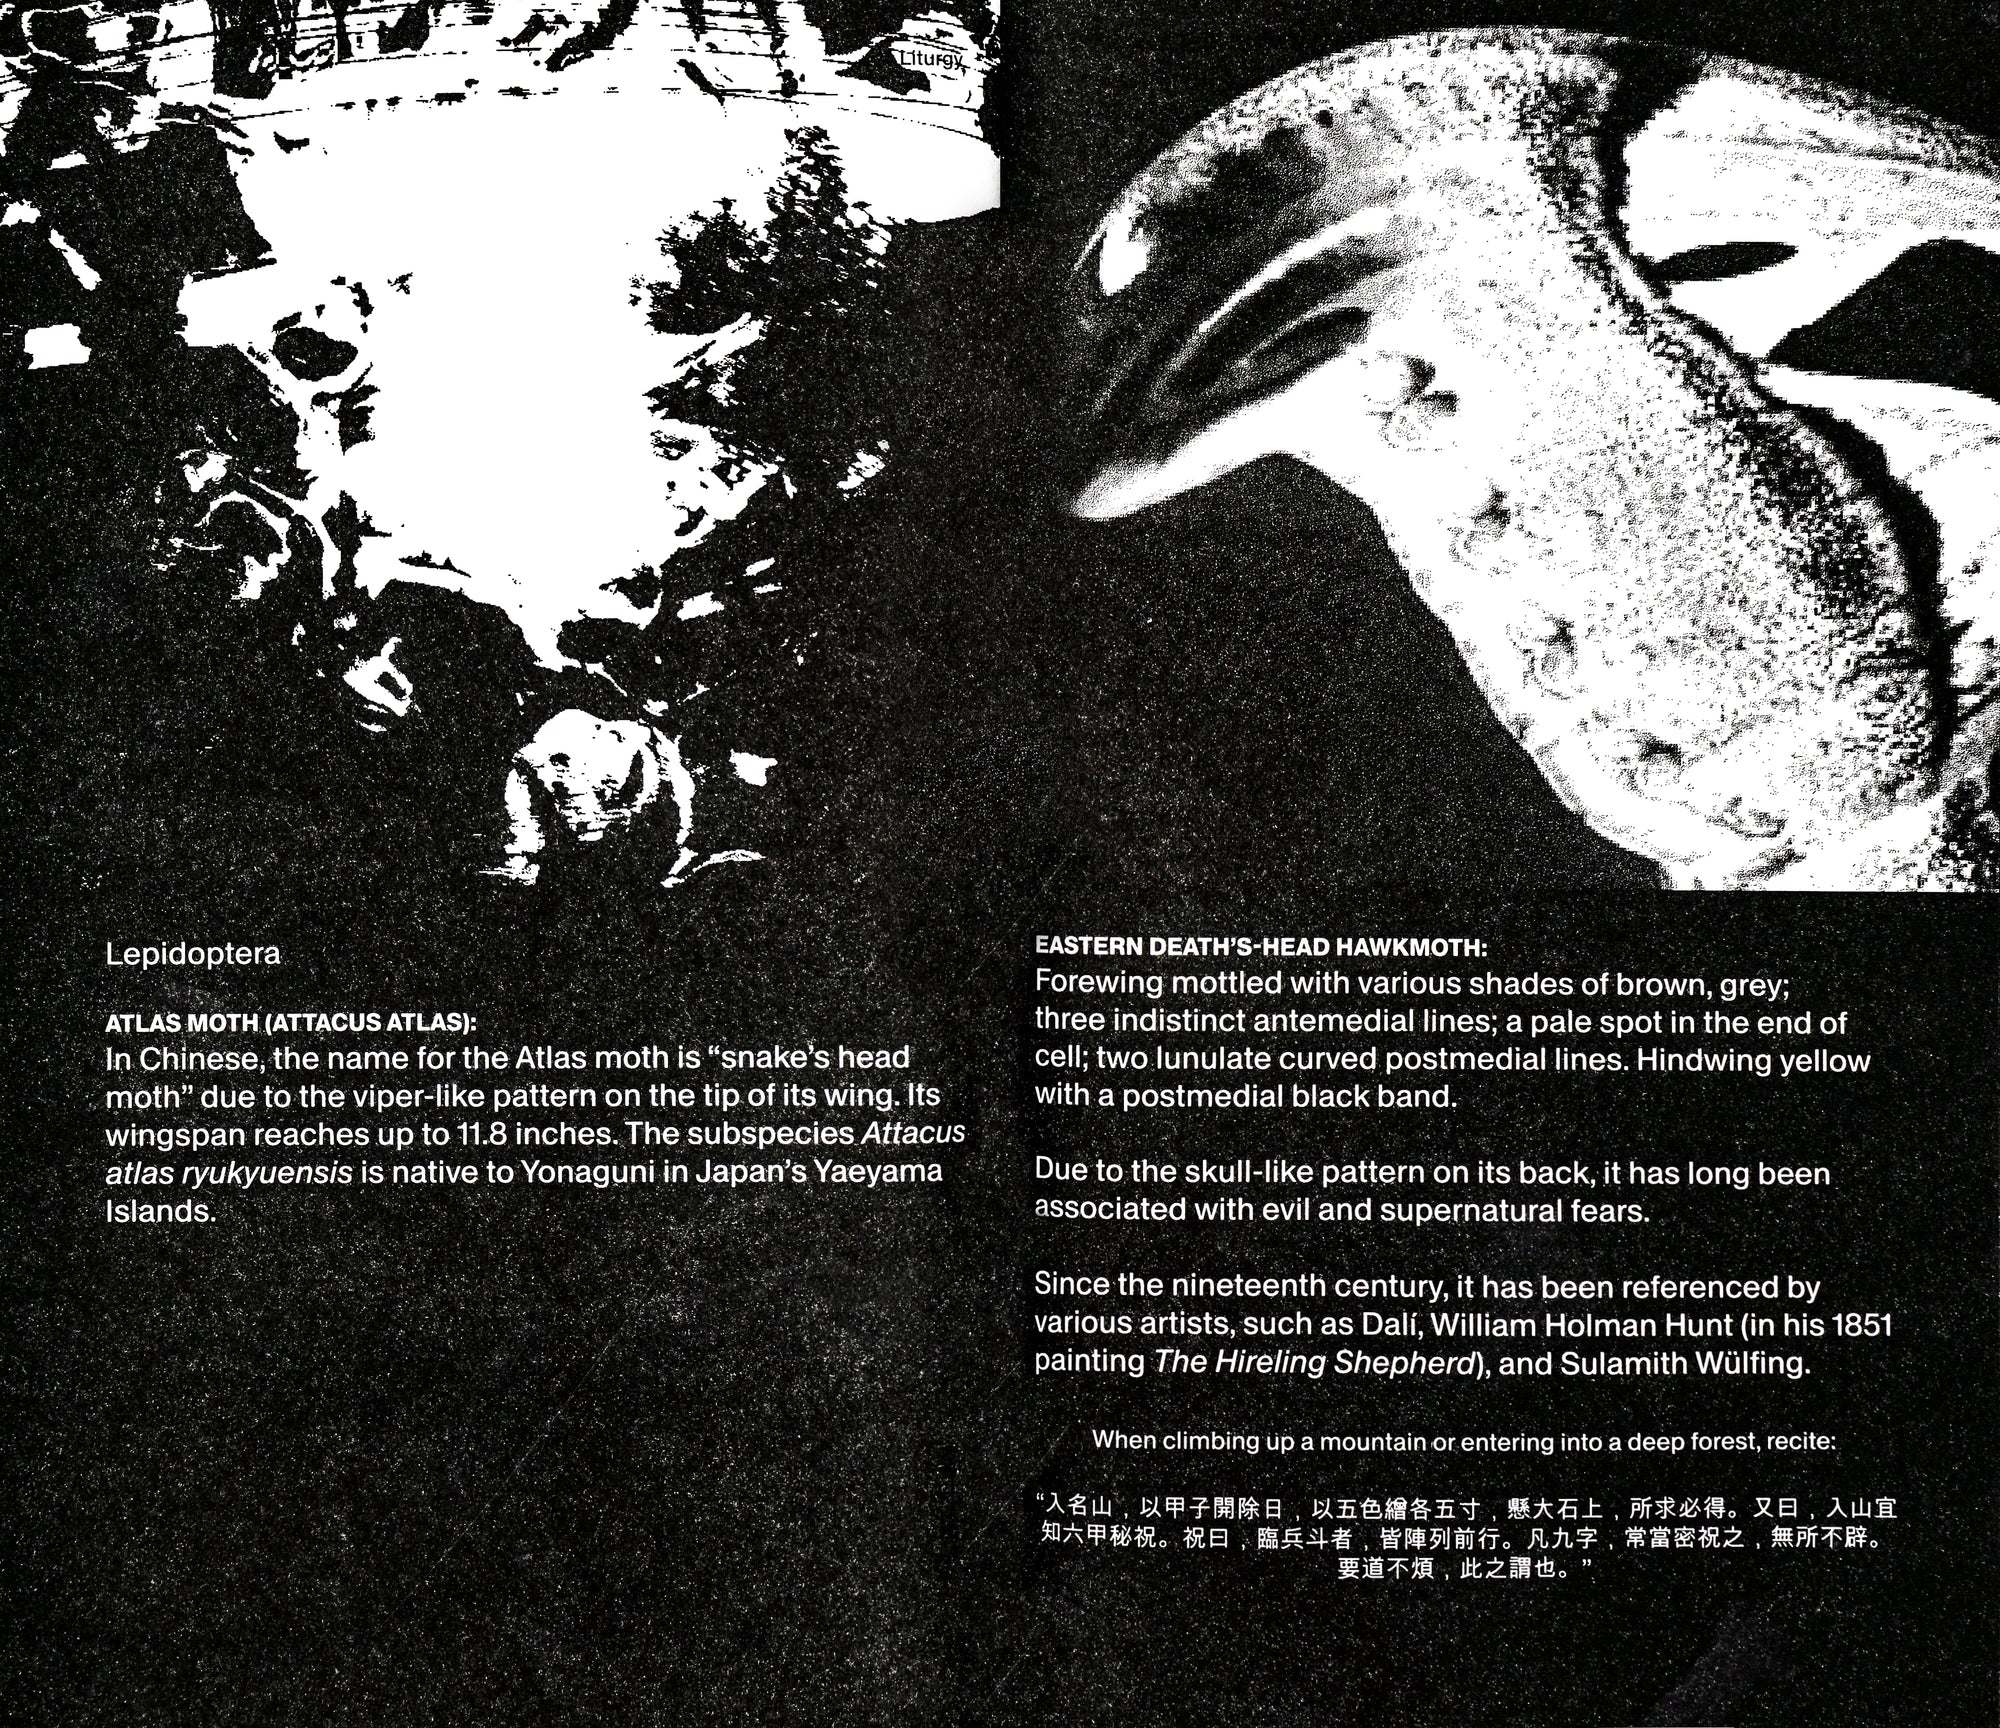 Book spread with monochrome black background. Both pages contain a black and white image of abstract shapes and a column of text beneath it in white sans serif writing. 